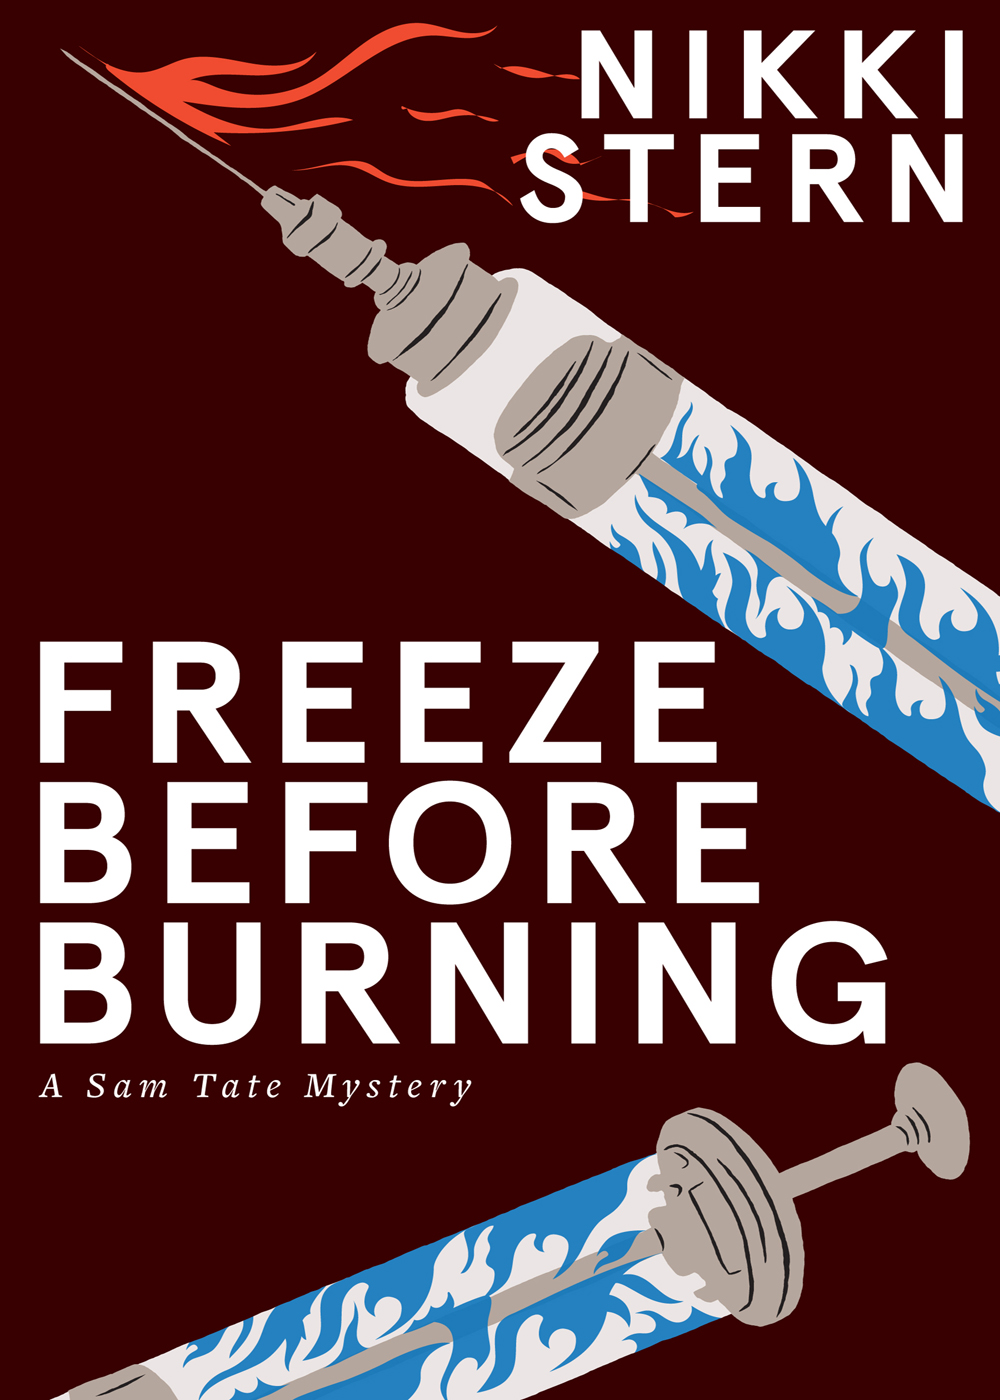 Freeze Before Burning by Nikki Stern